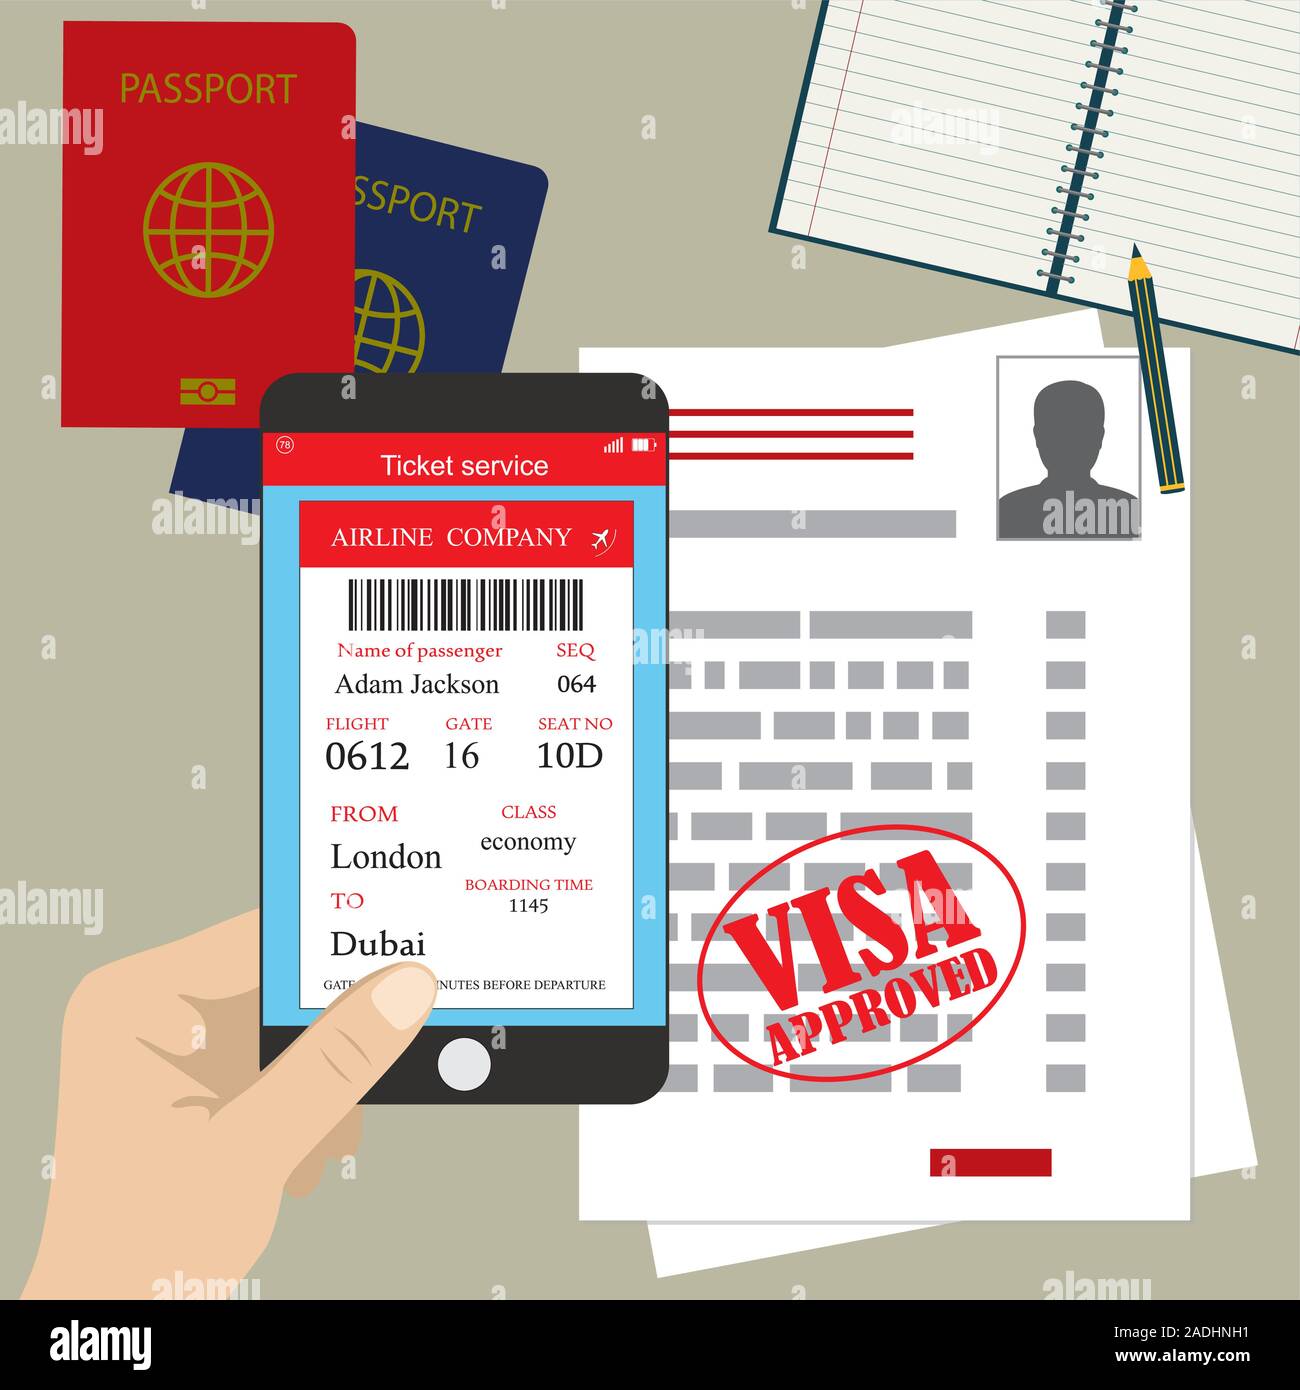 visa approved blank or work permit, passport and smartphone with boarding pass ticket. Flat design, vector illustration. Stock Vector